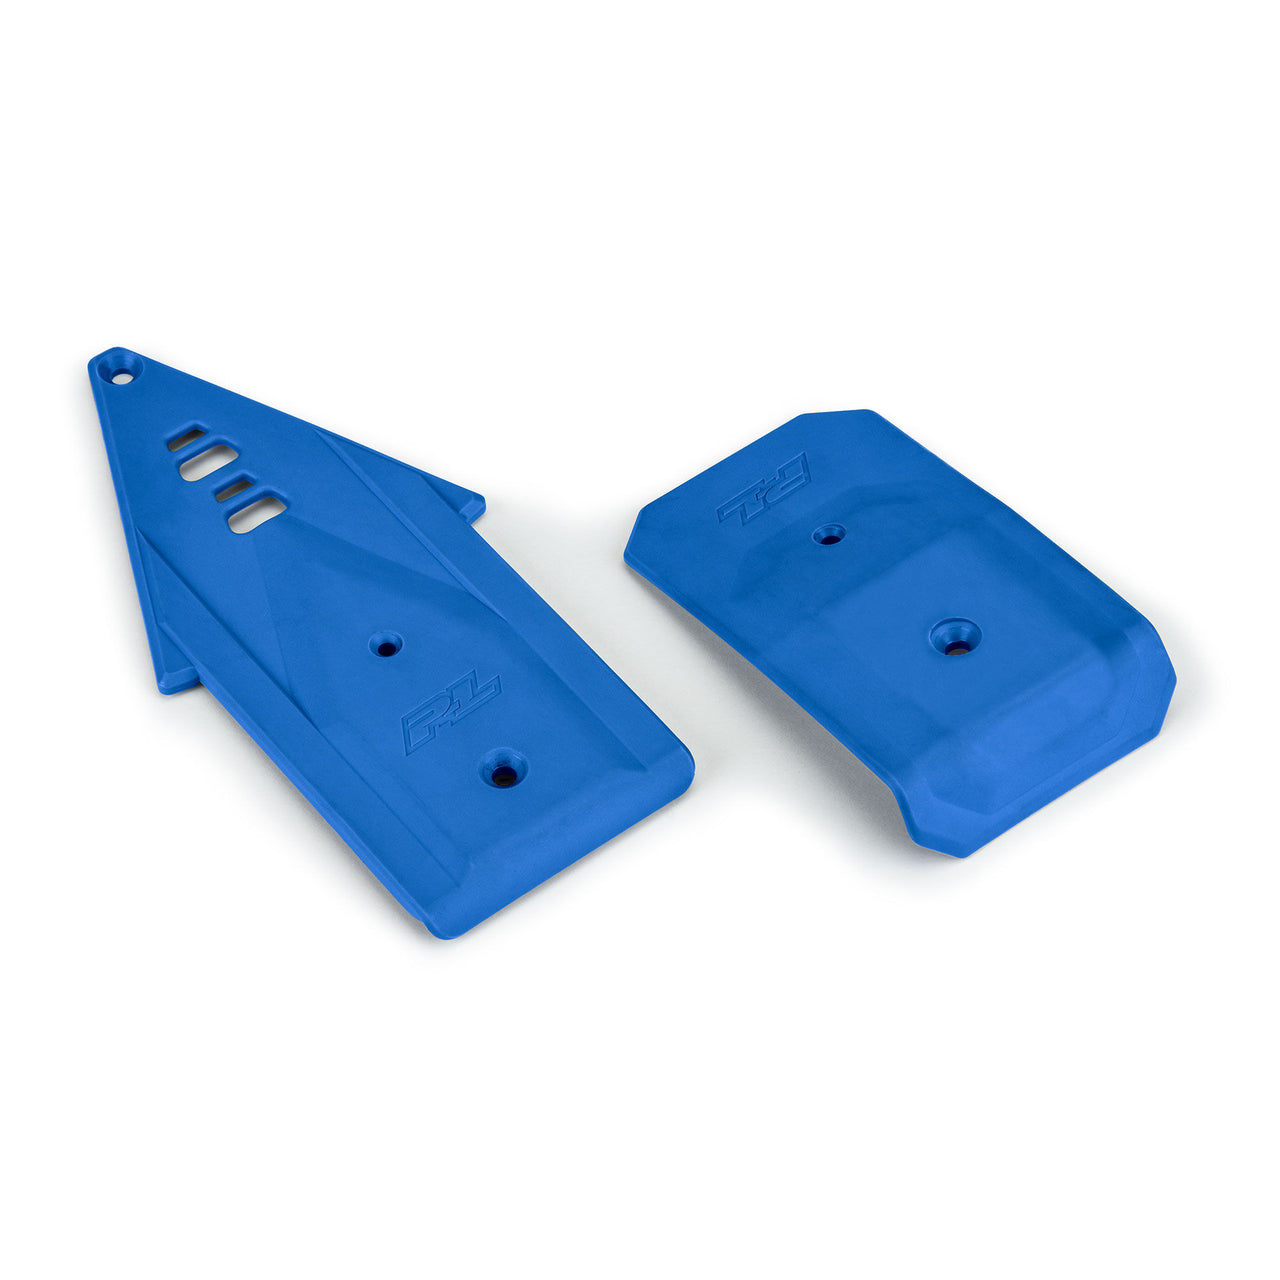 PRO639506 Bash Armor Front/Rear Skid Plates (Blue) for ARRMA 3S Vehicles